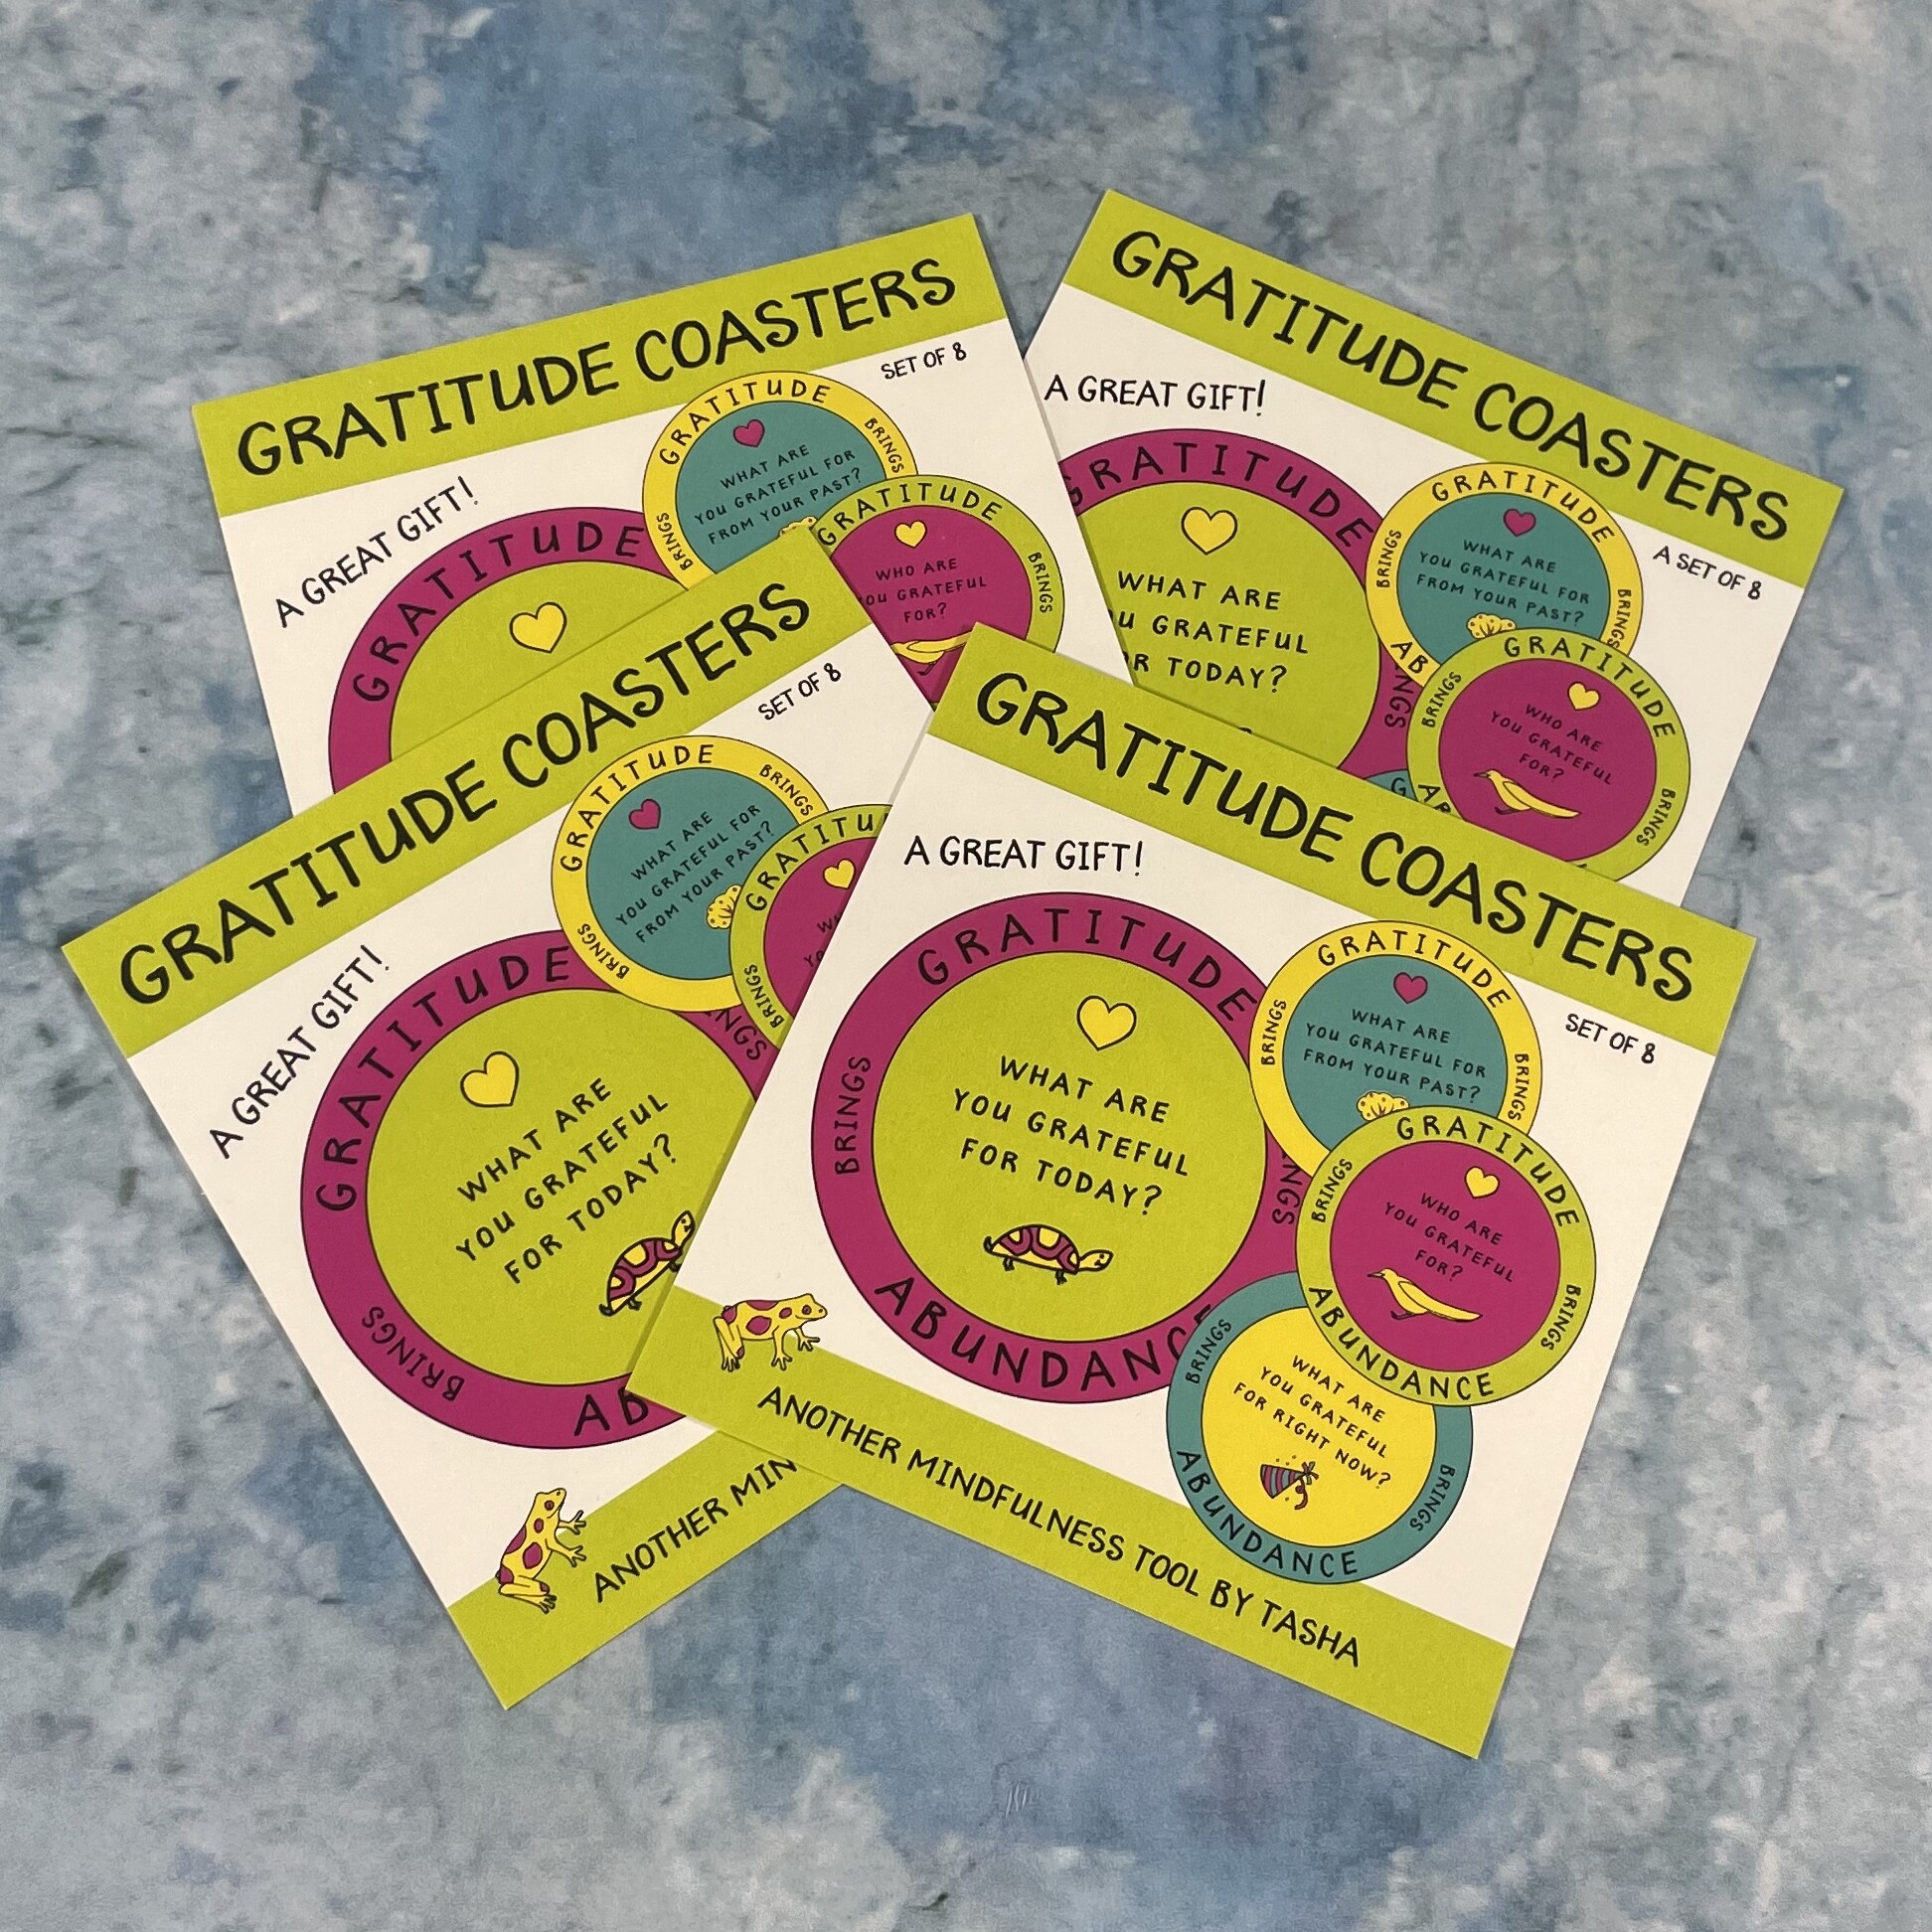 Product Labels for Gratitude Coasters - design by BTV Creative